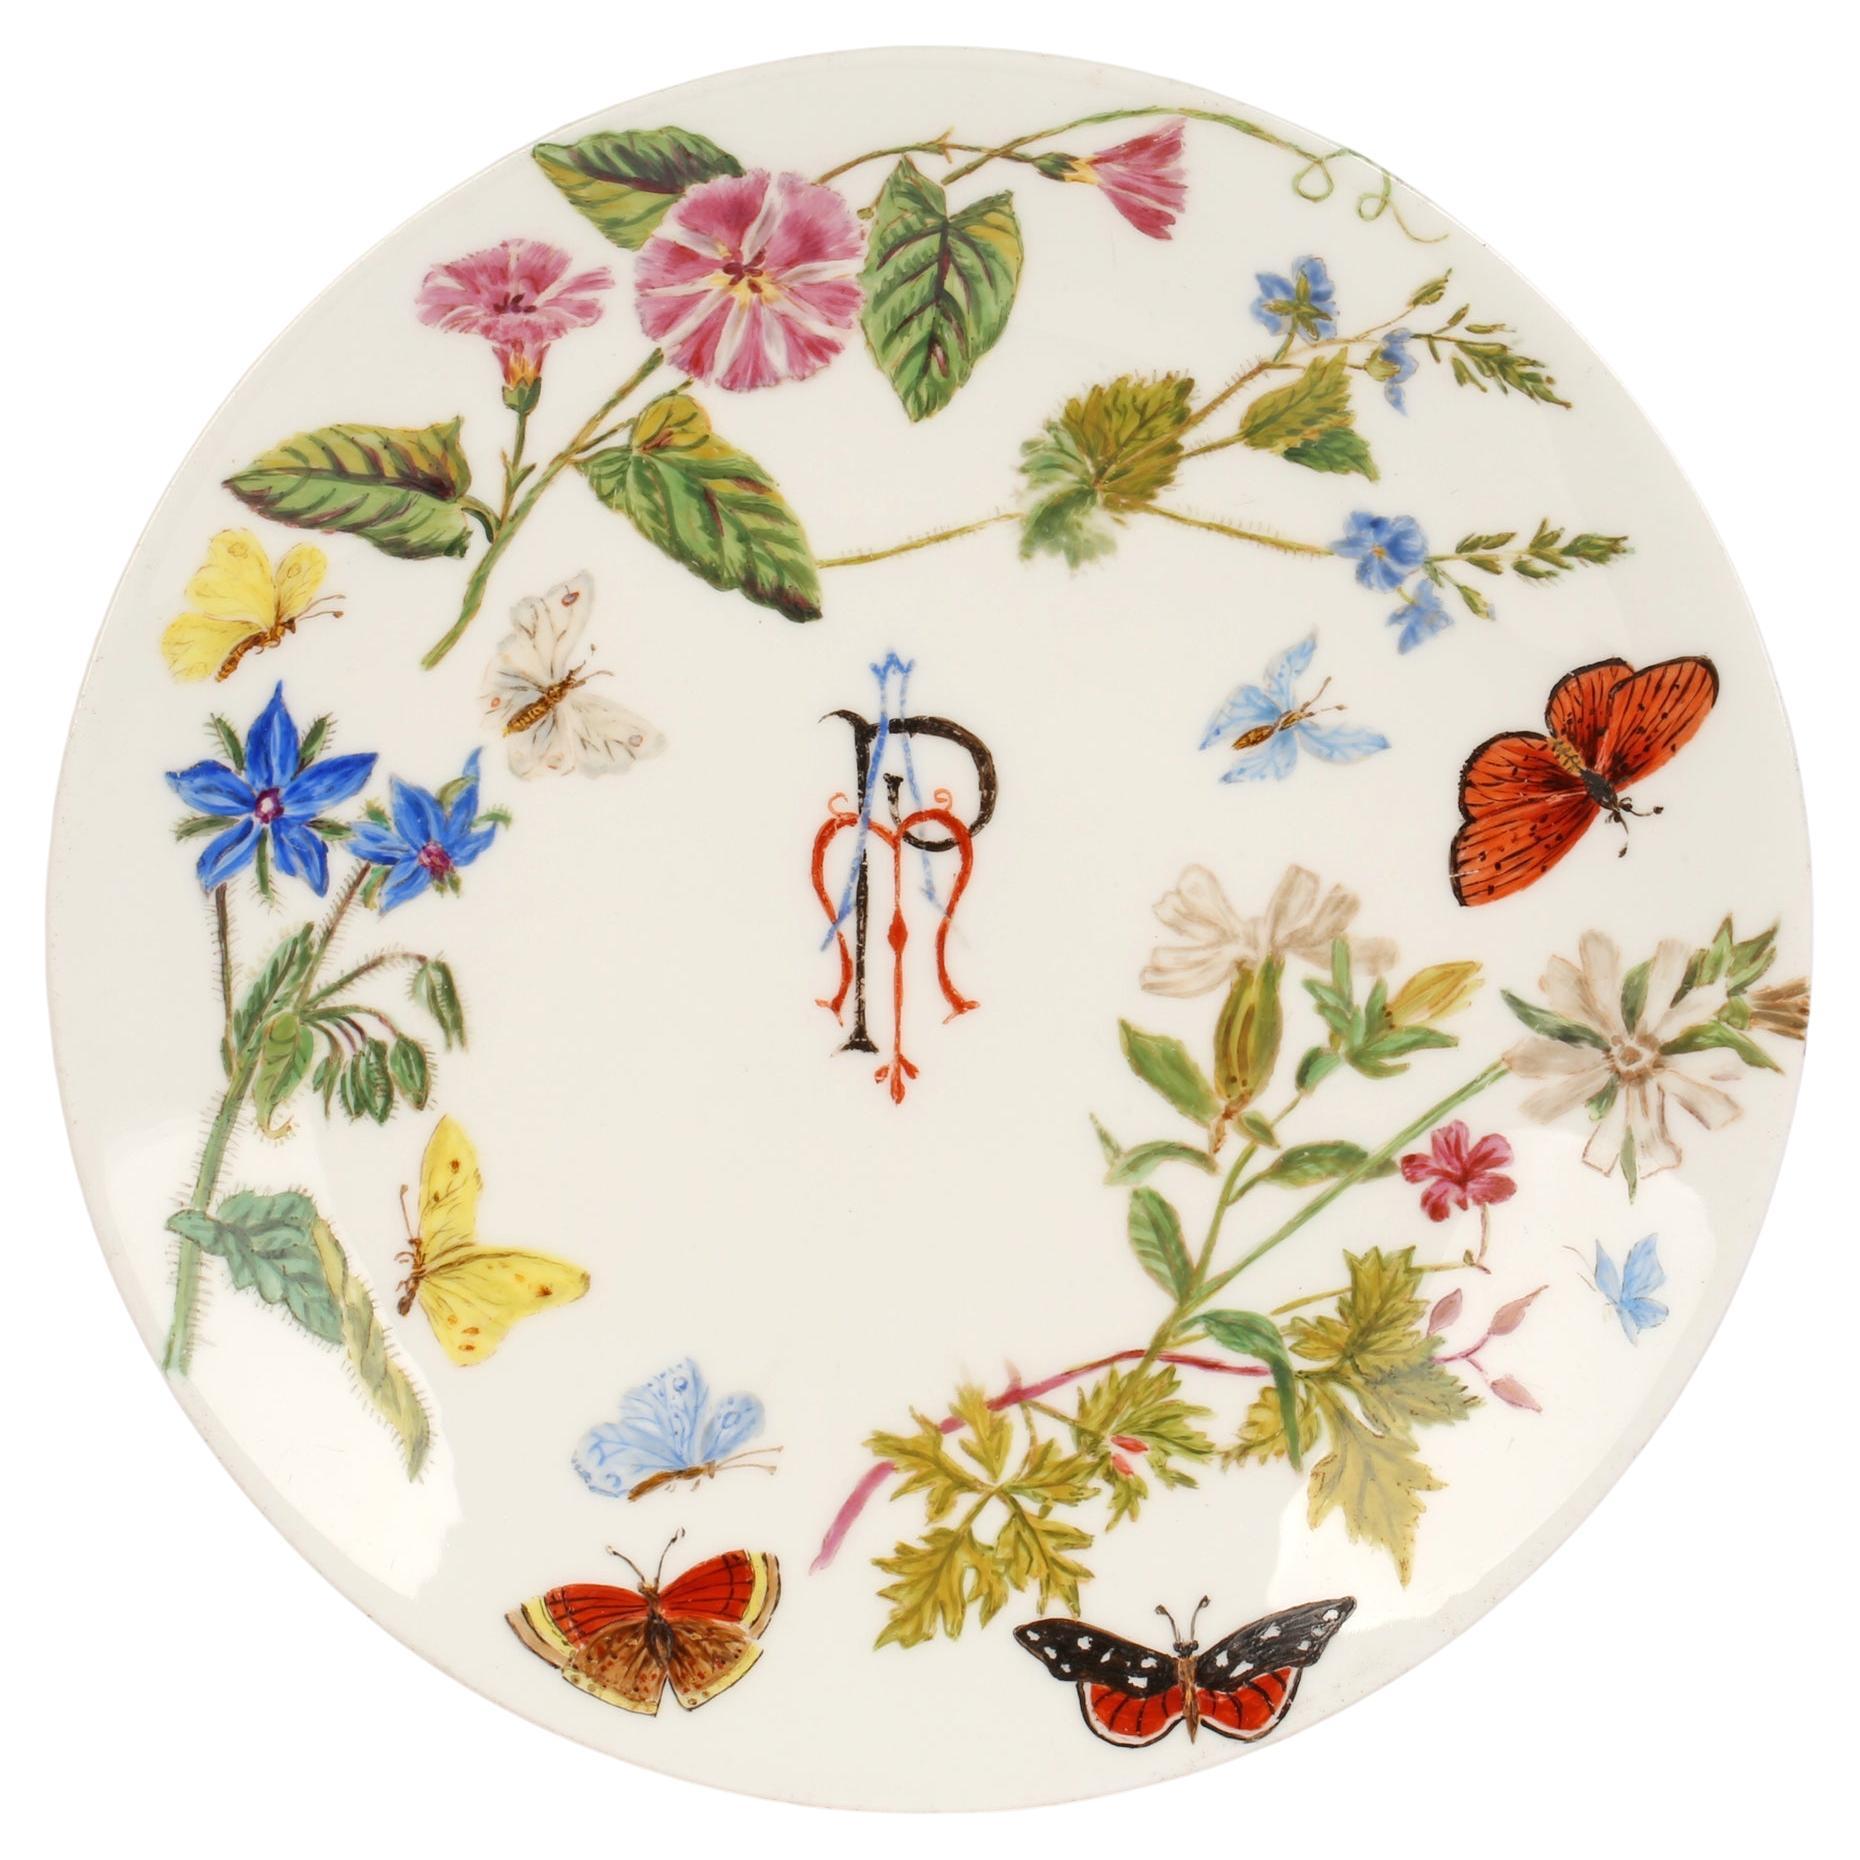 Minton Porcelain Hand-Painted Blank Cabinet Plate Signed AMB, 1890